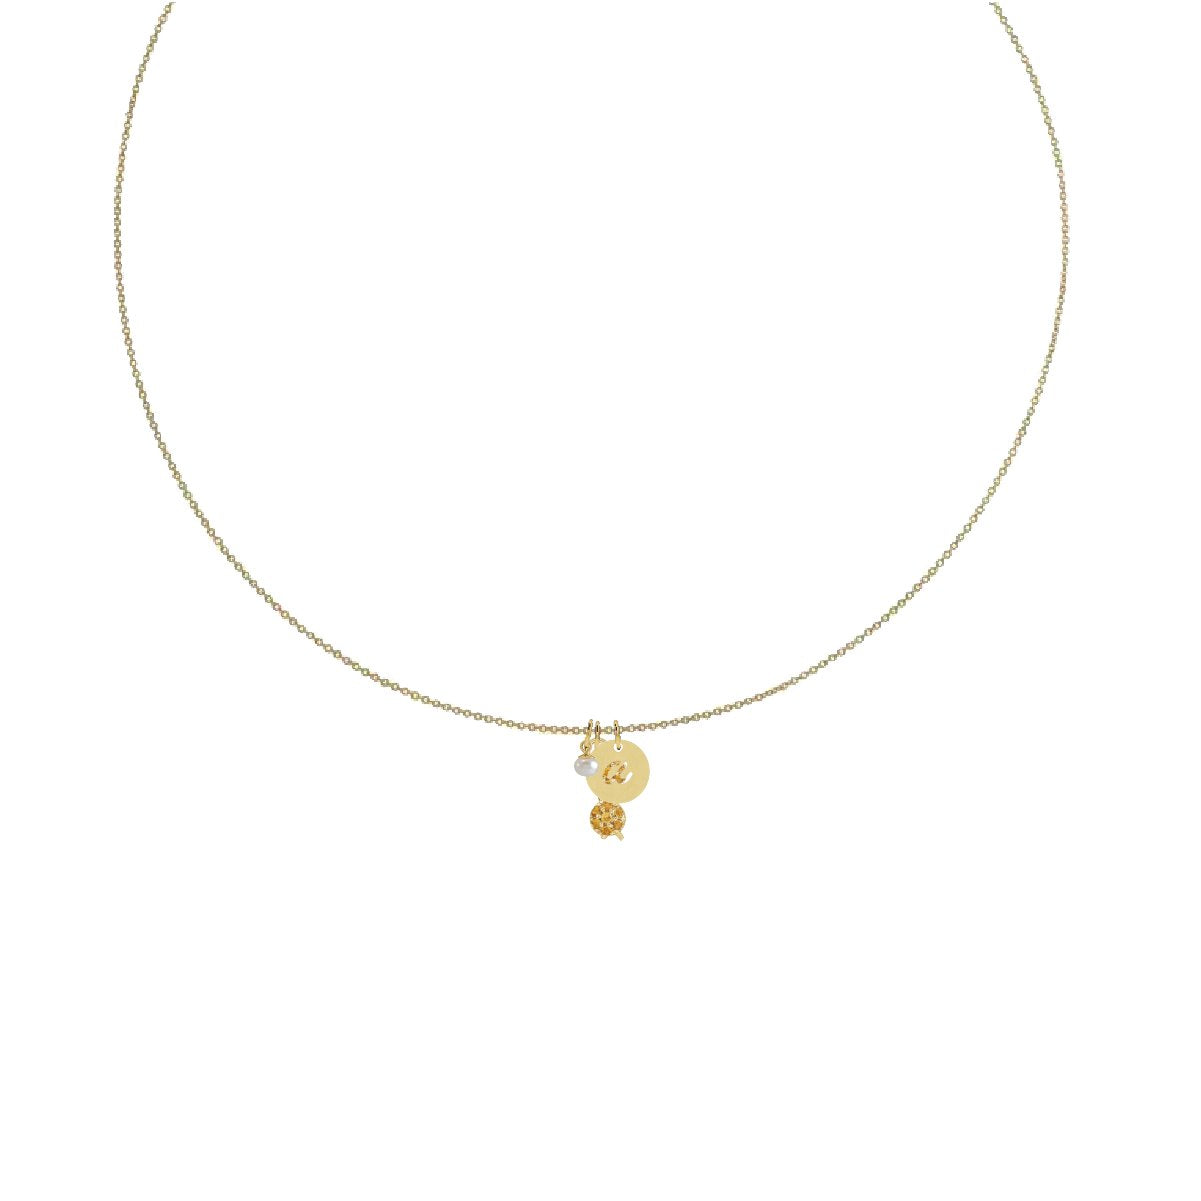 Charm Collection - For the Sun Worshipper Robyn Canady Charm + 14K Gold Filled Chain Add a Pearl and Initial 